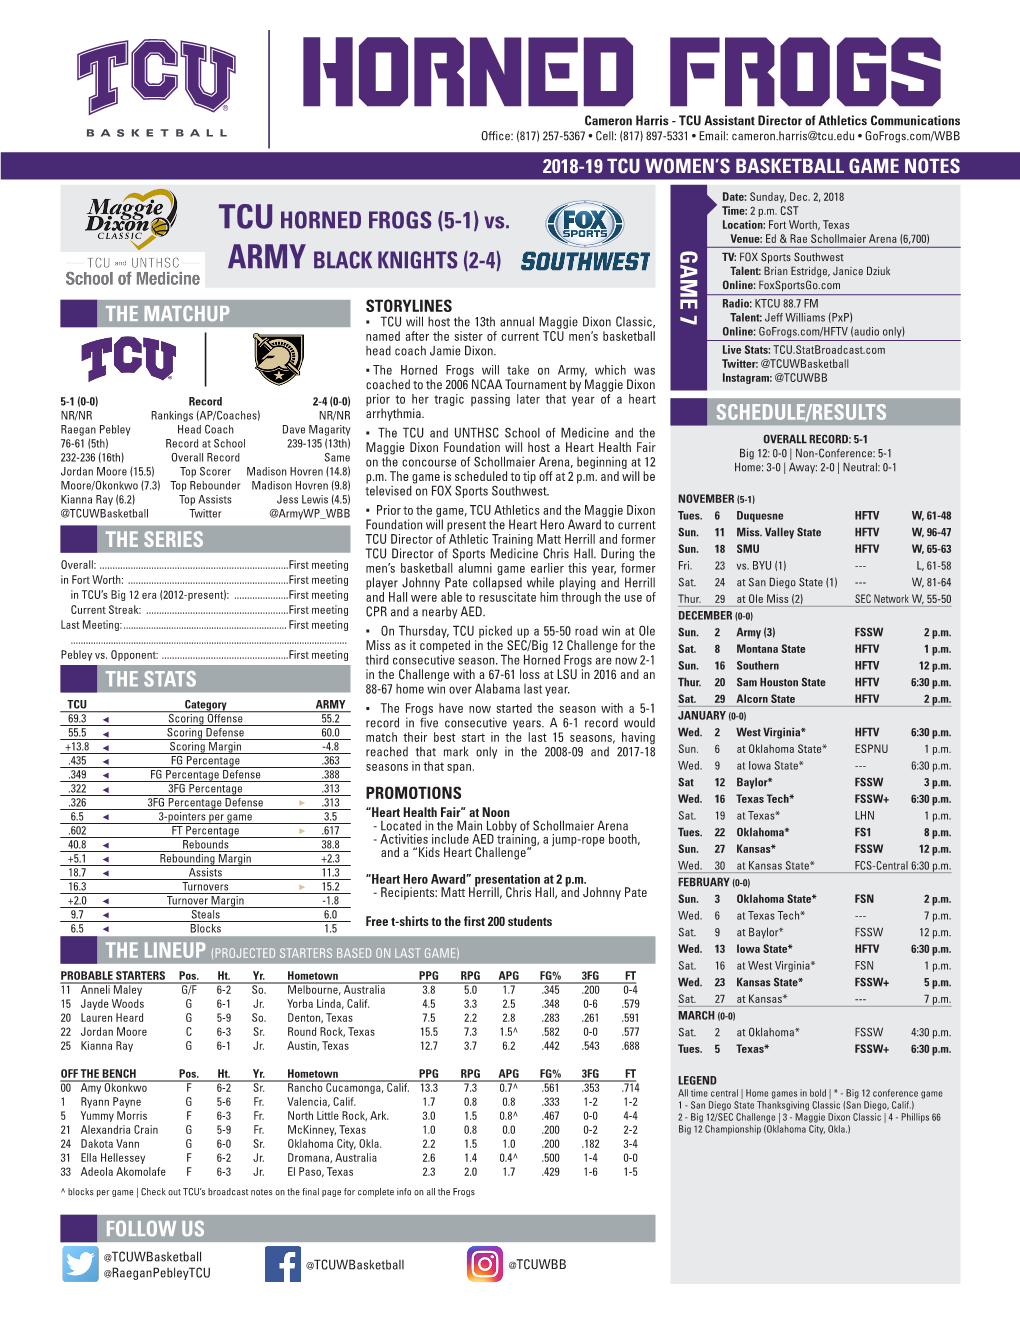 TCUHORNED FROGS (5-1) Vs. ARMY BLACK KNIGHTS (2-4) GAME 7